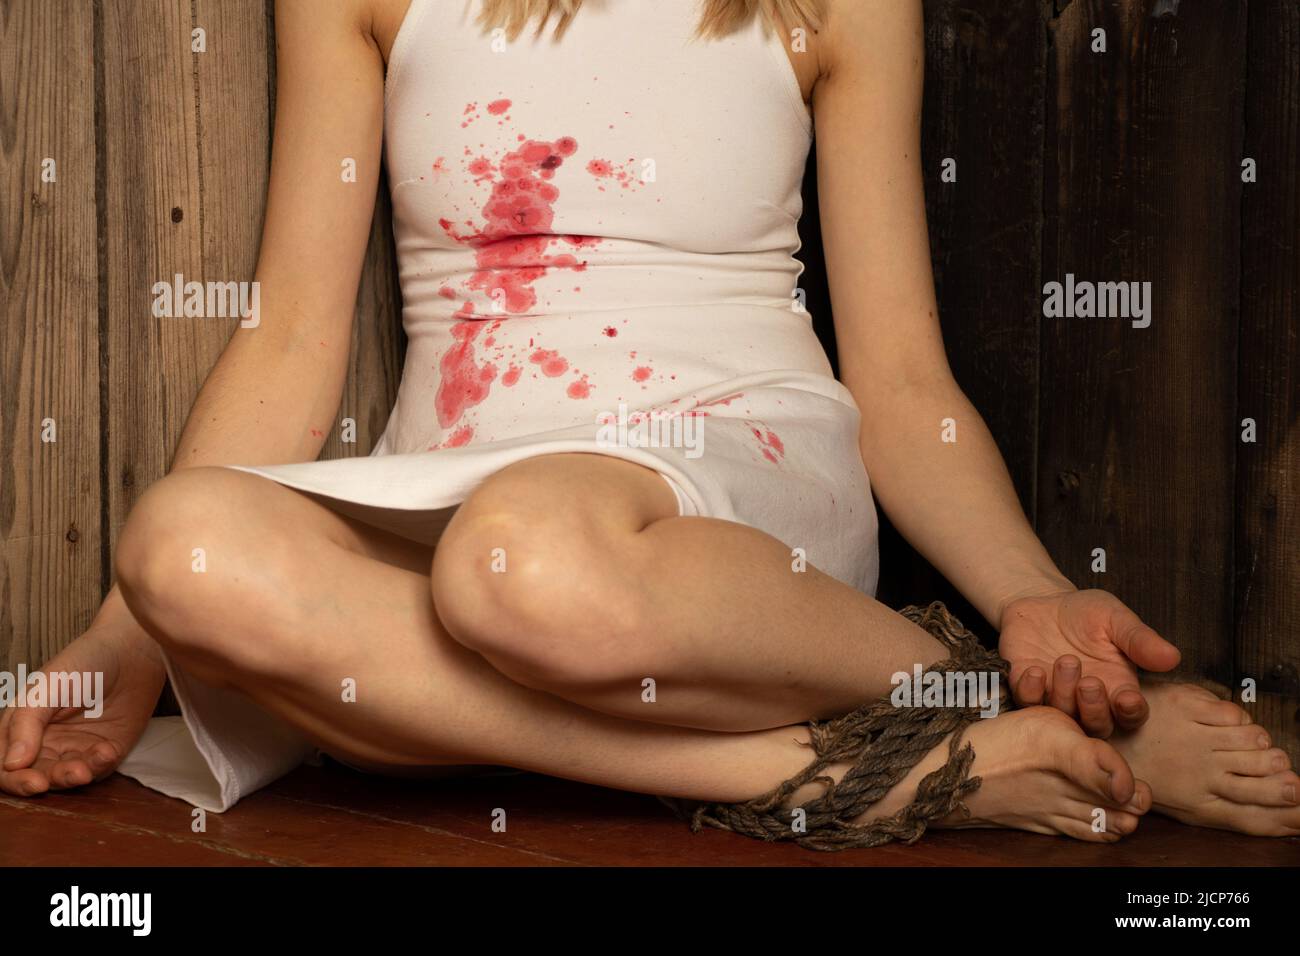 Ukrainian girl in a white dress with blood stains on the dress, tortured by Russian soldiers in the corner of the room, war in Ukraine, protest action Stock Photo